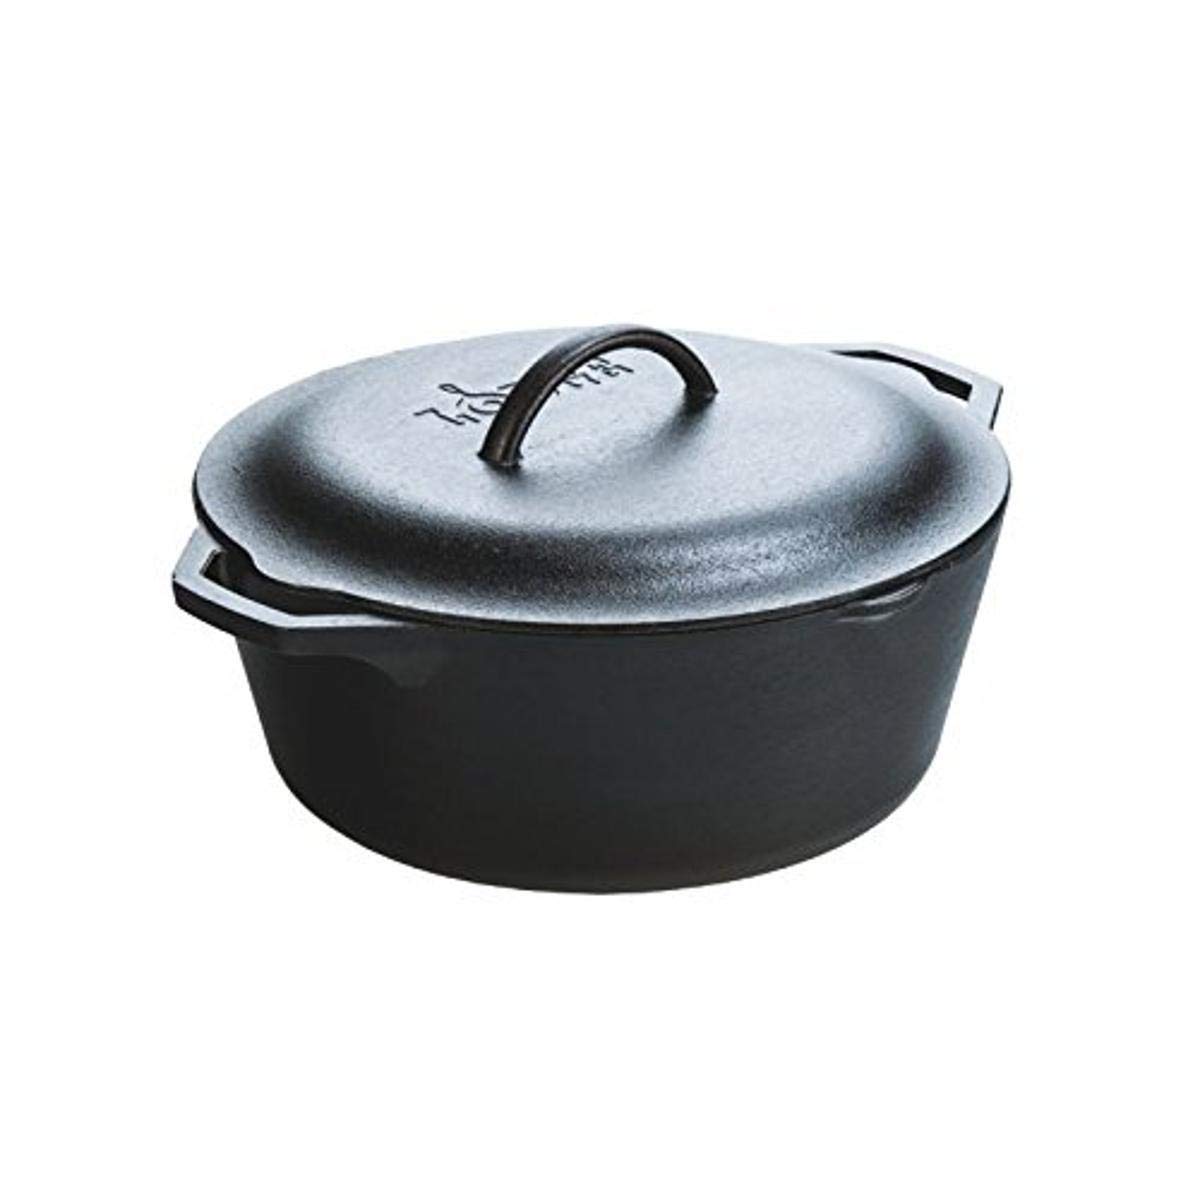 Lodge Cast Iron Serving Pot Dutch Oven with Dual Handles, Pre-Seasoned, 7-Quart,Black | Lodge Manufacturing Company GL12 Tempered Glass Lid, 12", Clear Bundle